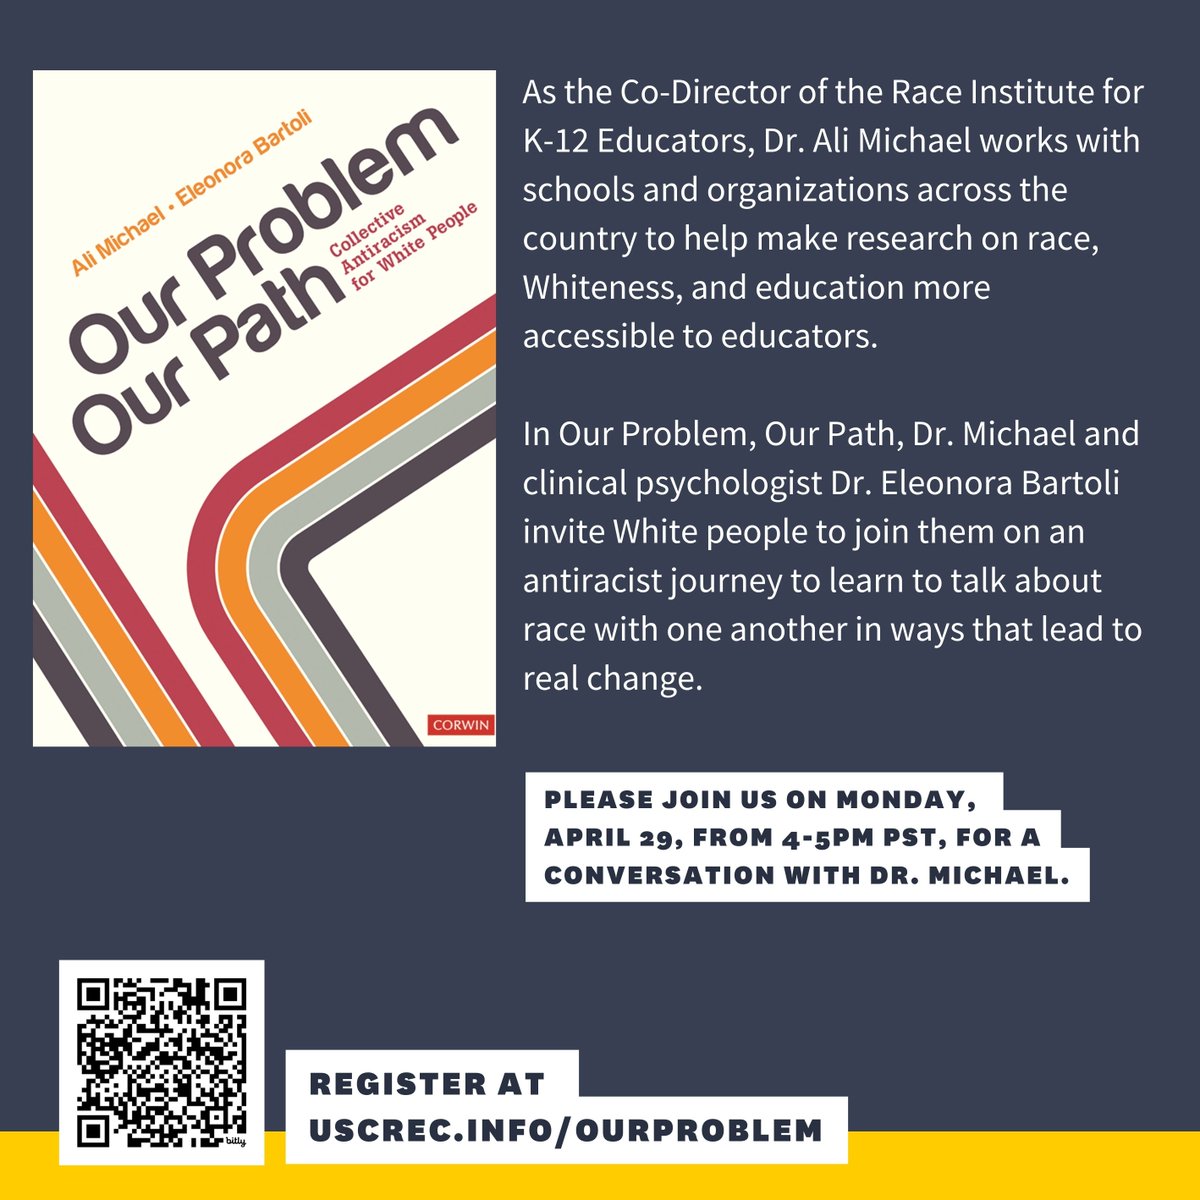 Did you miss our first session in our Book Talk Series? Make sure to save your spot for the next one on April 29 @ 4 pm PST with Ali Michael! Register here: uscrec.info/ourproblem